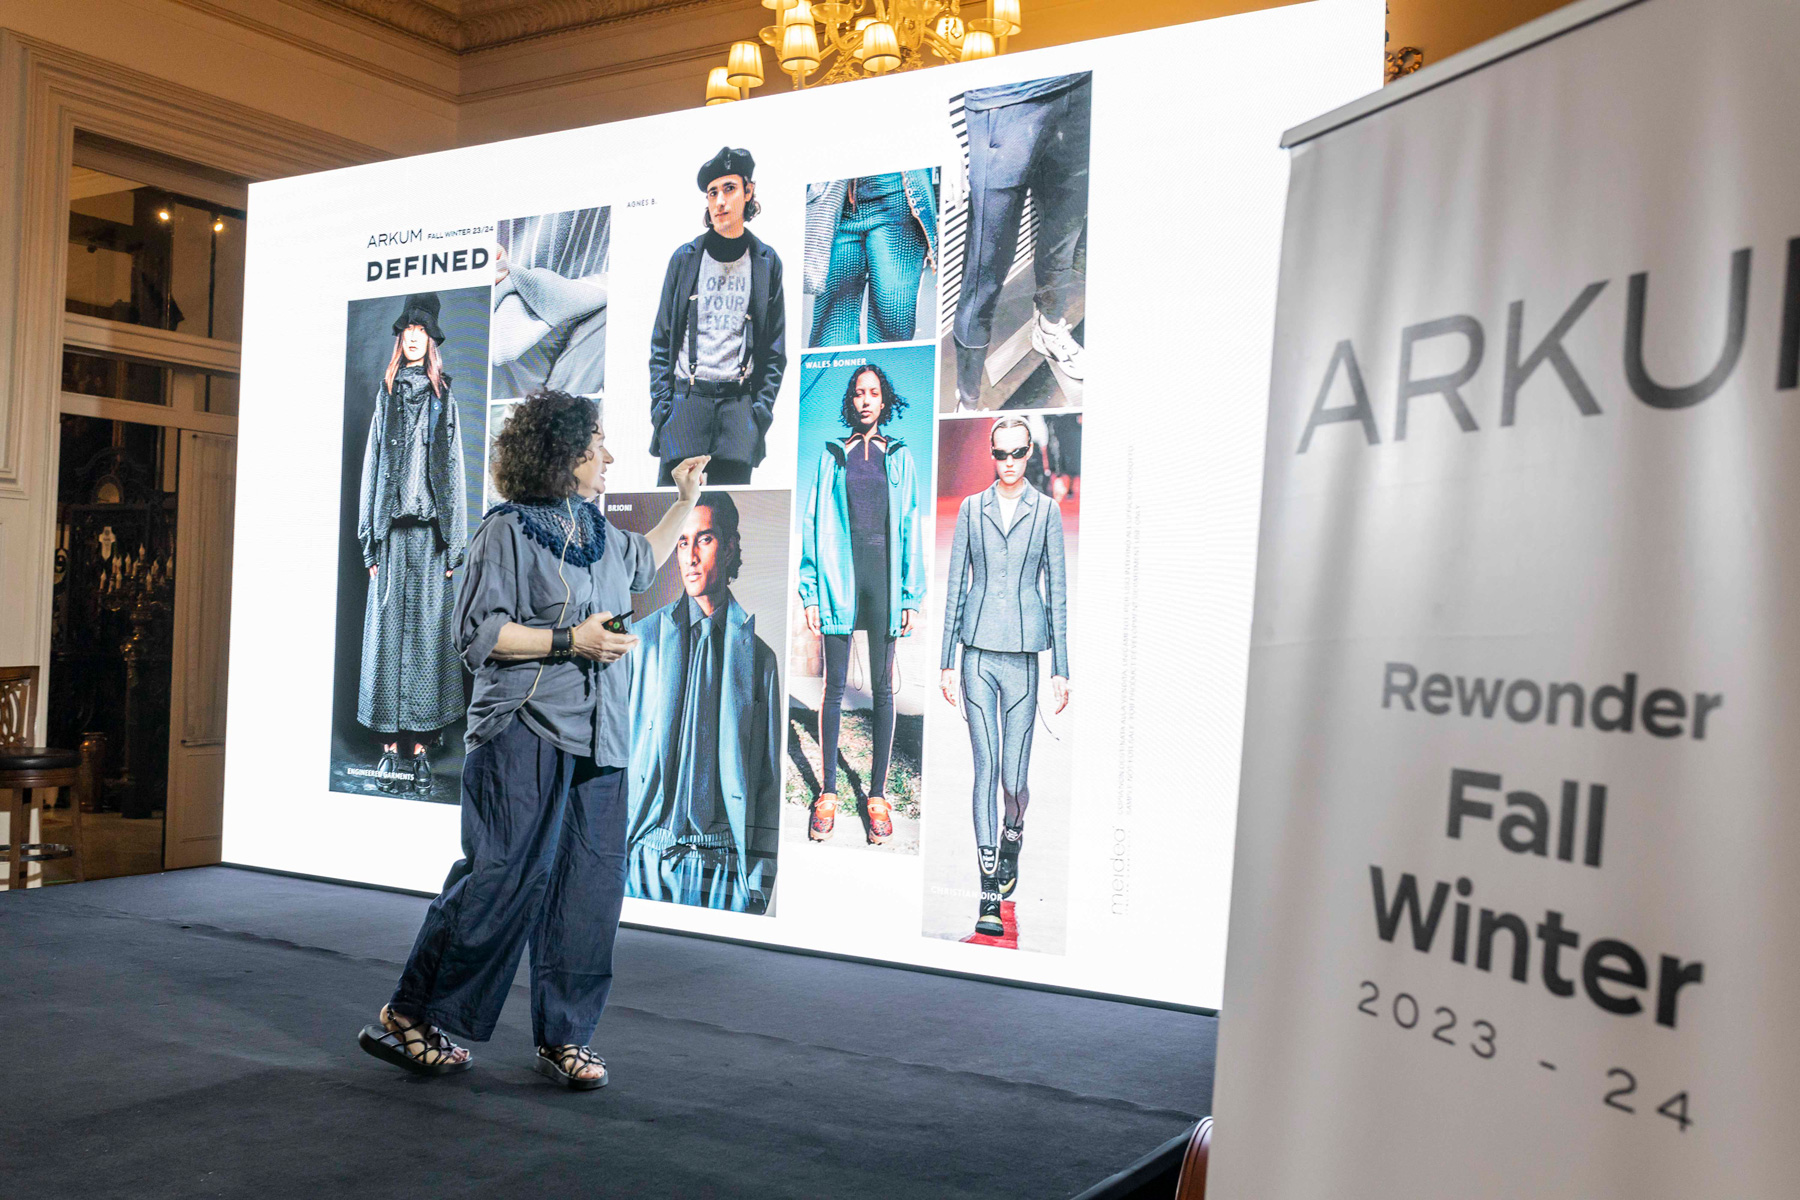 Lucia Rosin on stage to present the ARKUM Rewonder collection at Pera Palace Hotel, Istanbul